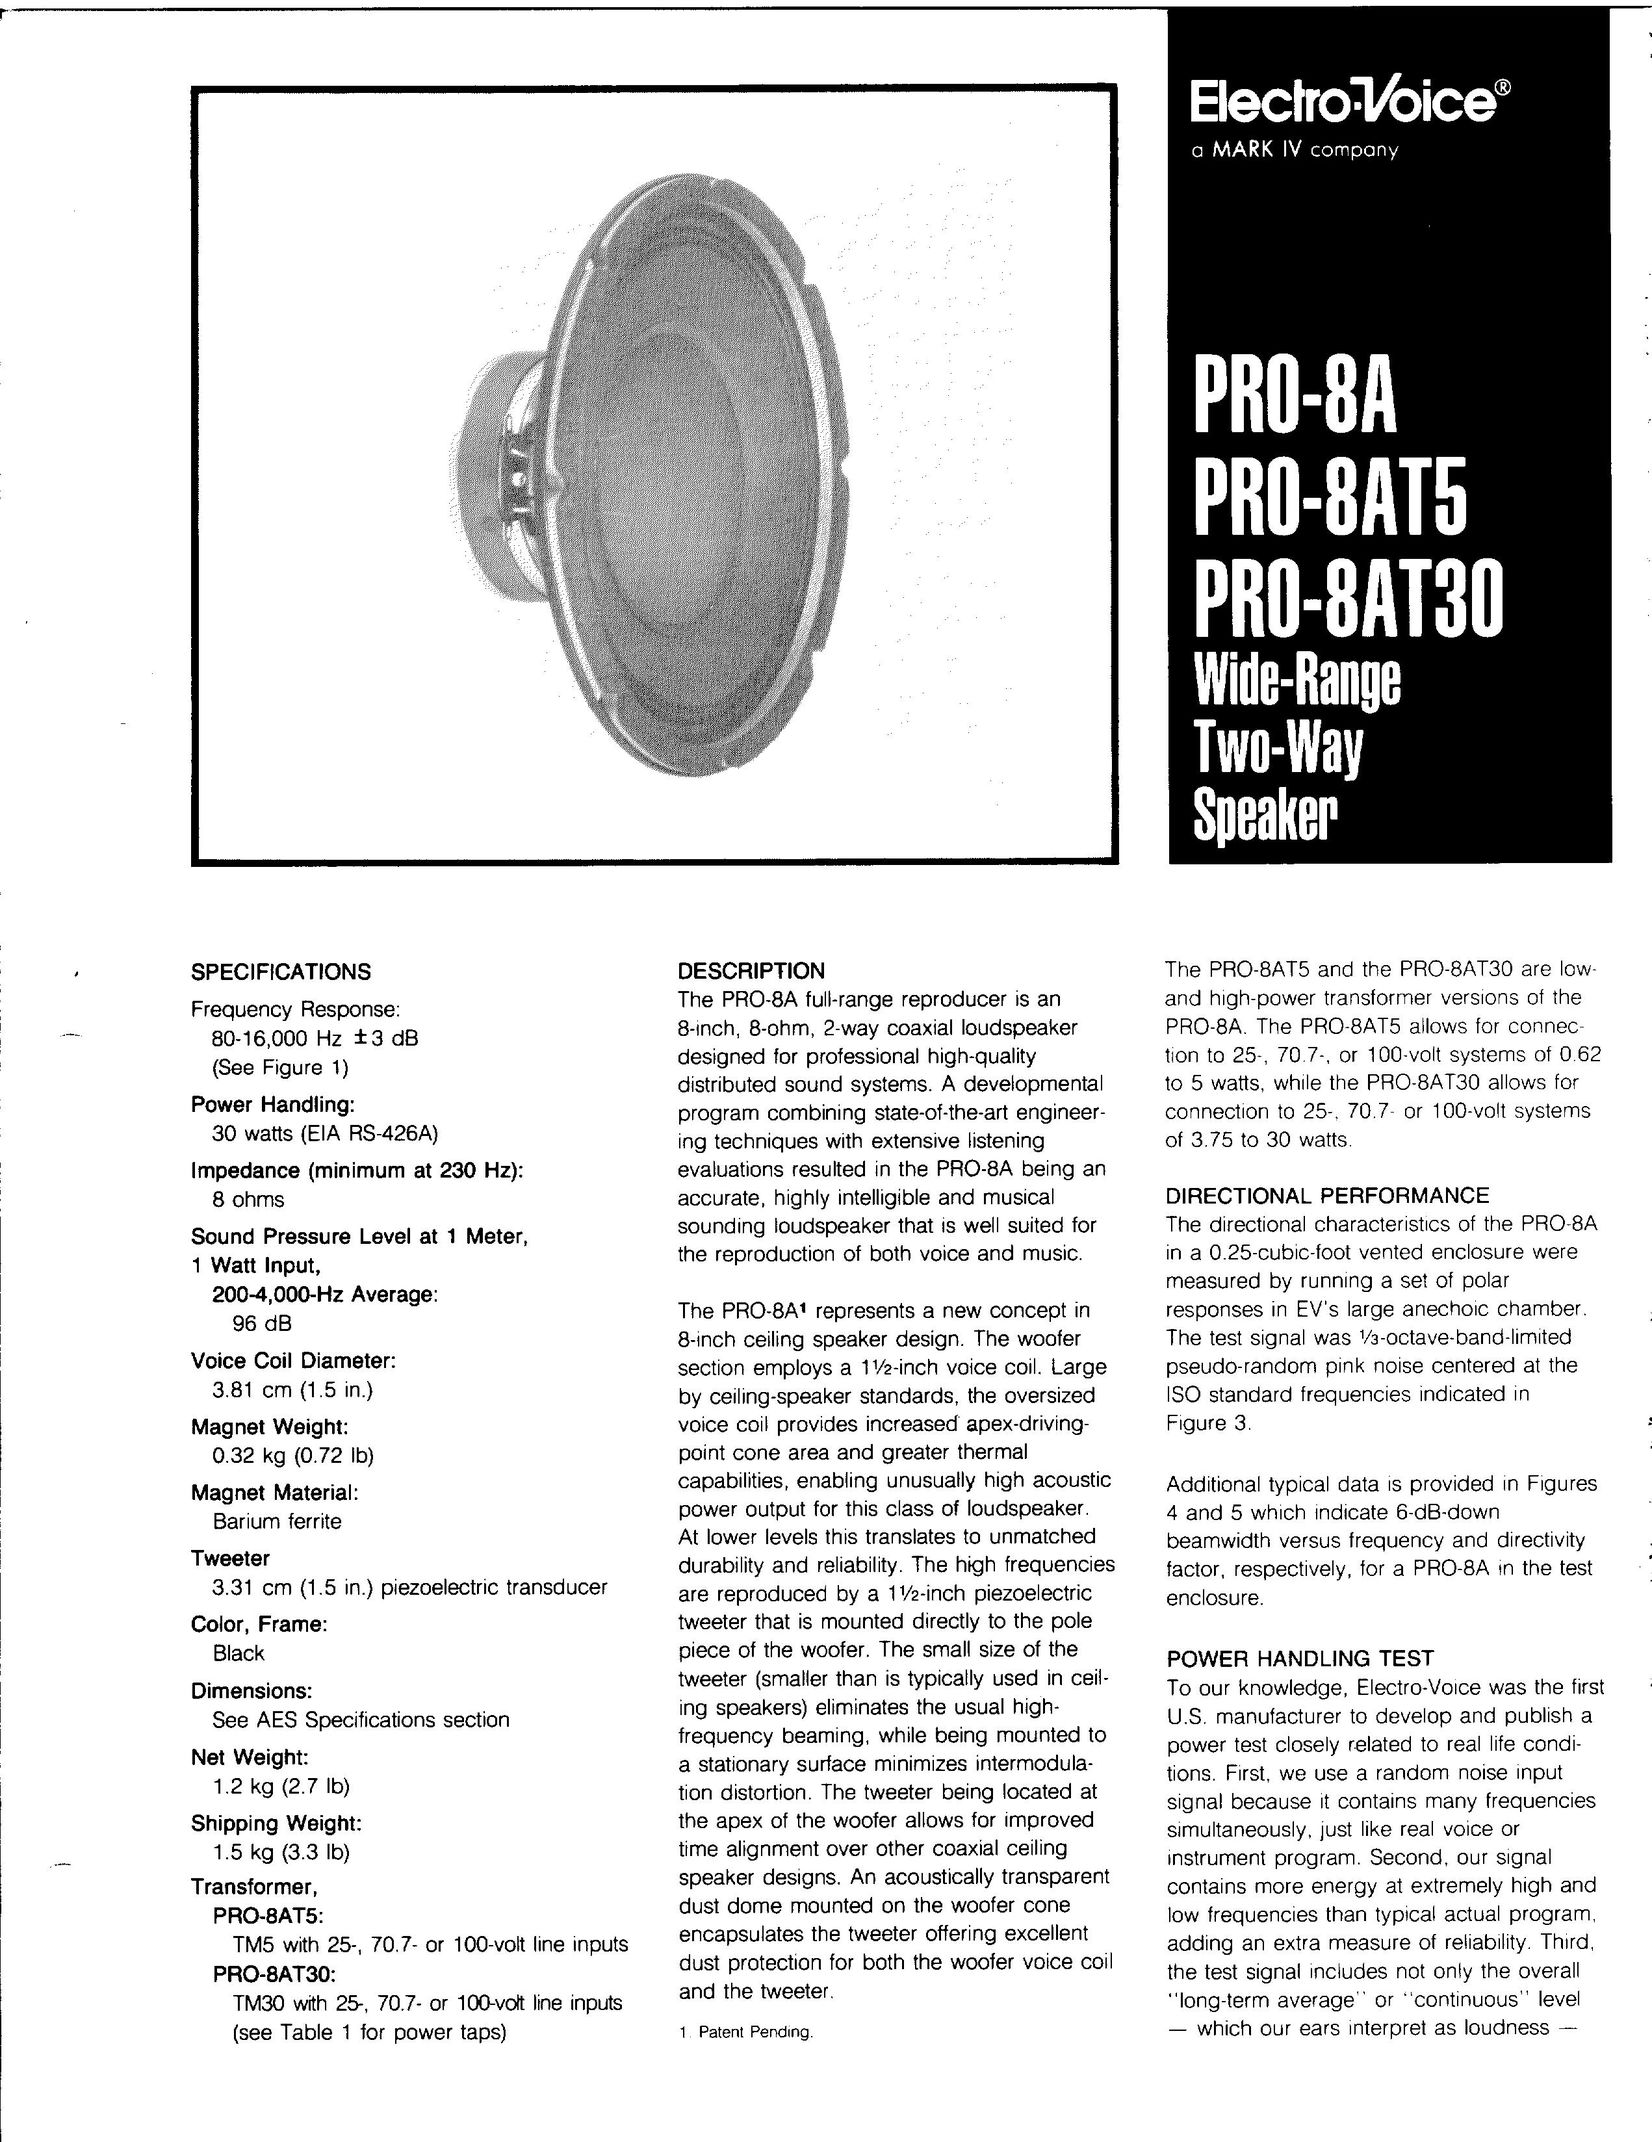 Electro-Voice PRO-8AT5 Speaker System User Manual